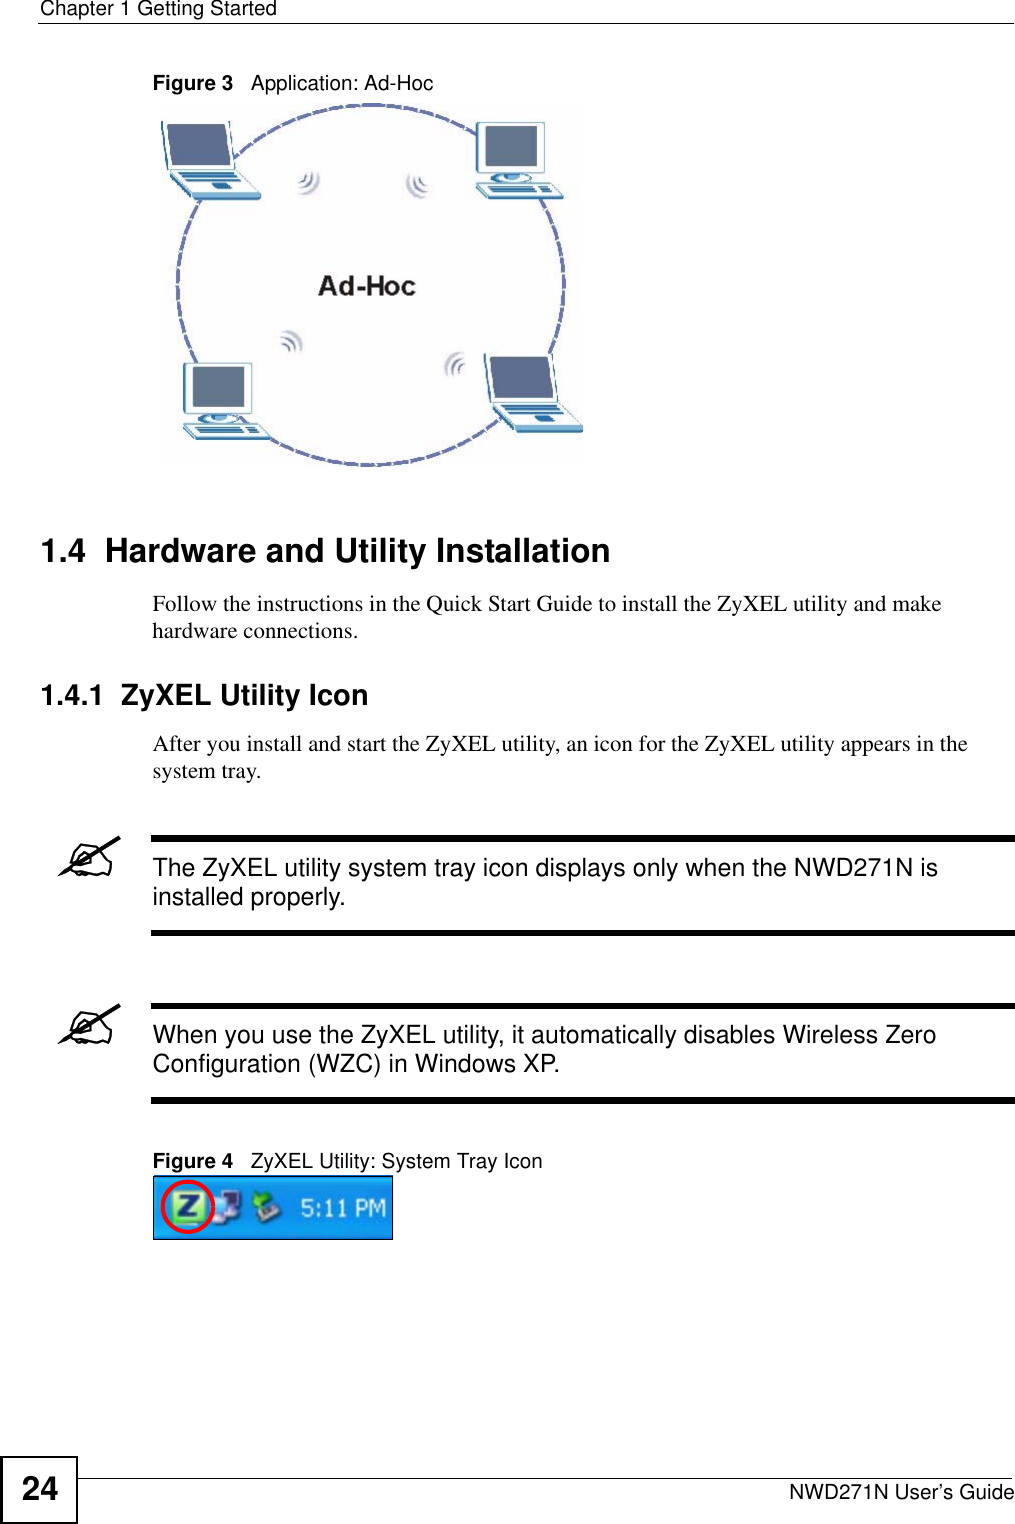 Chapter 1 Getting StartedNWD271N User’s Guide24Figure 3   Application: Ad-Hoc 1.4  Hardware and Utility InstallationFollow the instructions in the Quick Start Guide to install the ZyXEL utility and make hardware connections.1.4.1  ZyXEL Utility IconAfter you install and start the ZyXEL utility, an icon for the ZyXEL utility appears in the system tray.&quot;The ZyXEL utility system tray icon displays only when the NWD271N is installed properly.&quot;When you use the ZyXEL utility, it automatically disables Wireless Zero Configuration (WZC) in Windows XP.Figure 4   ZyXEL Utility: System Tray Icon 